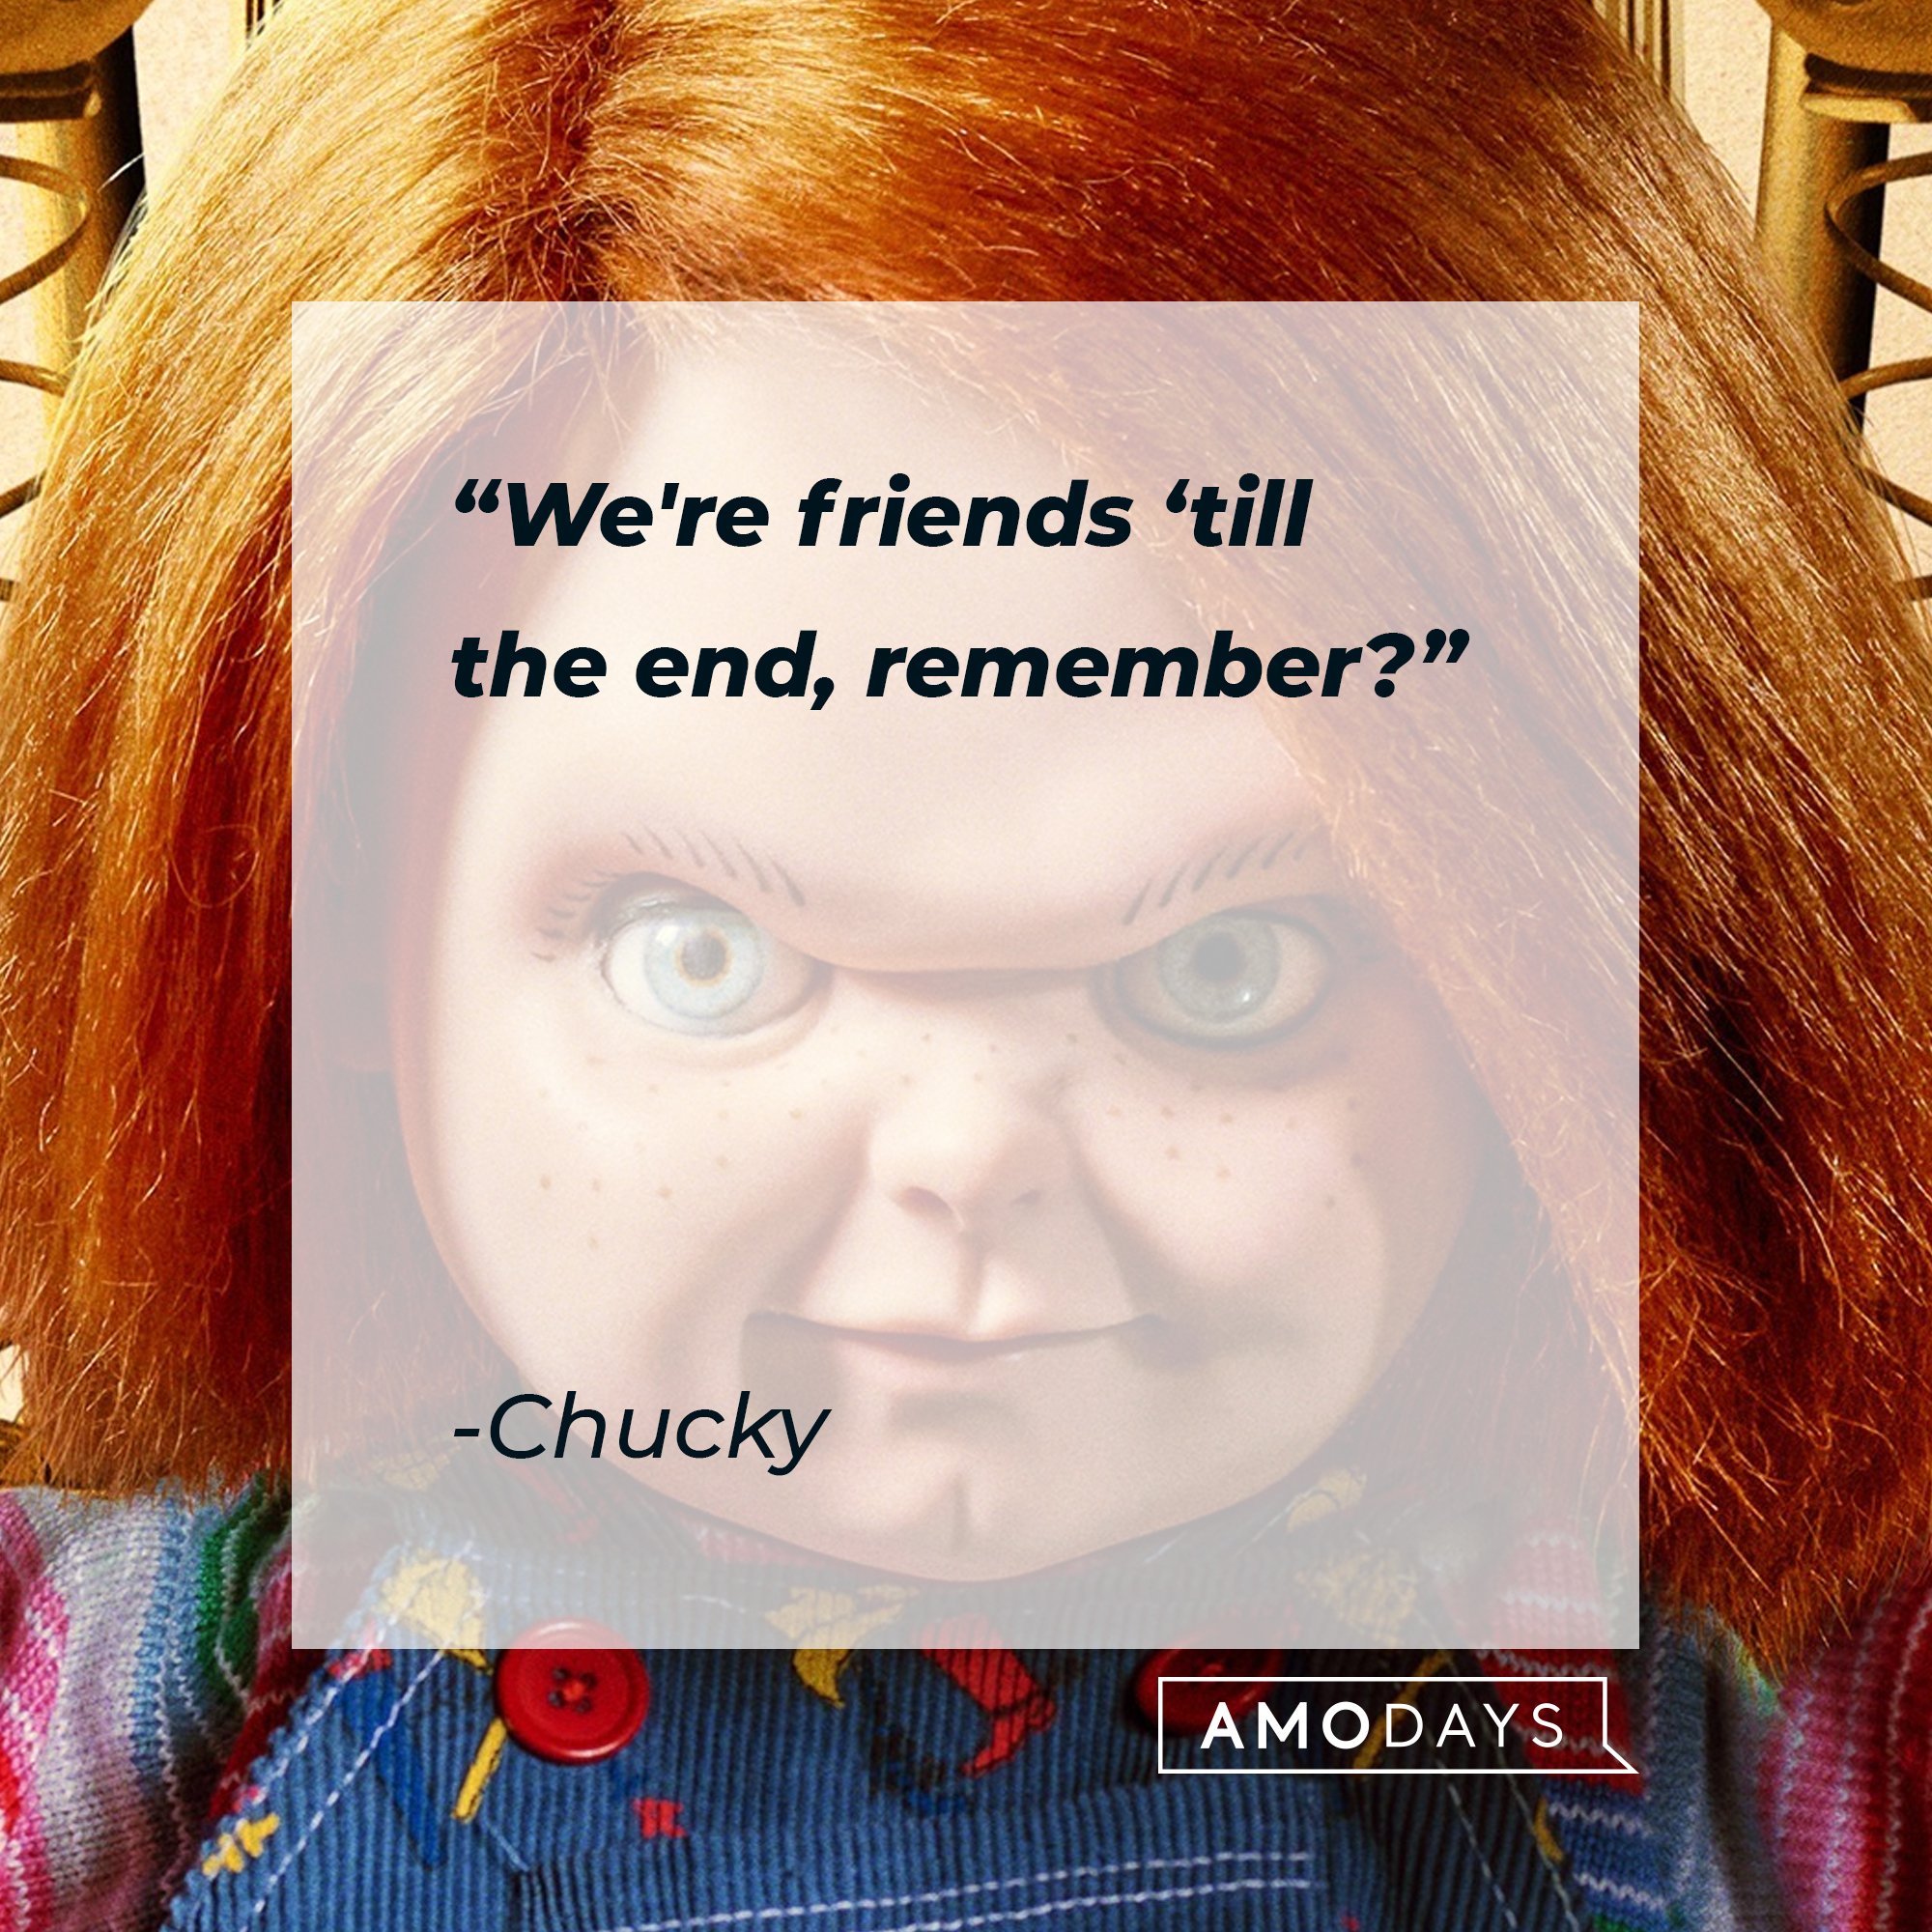 Chucky's quote: "We're friends ‘till the end, remember?" | Image: AmoDays